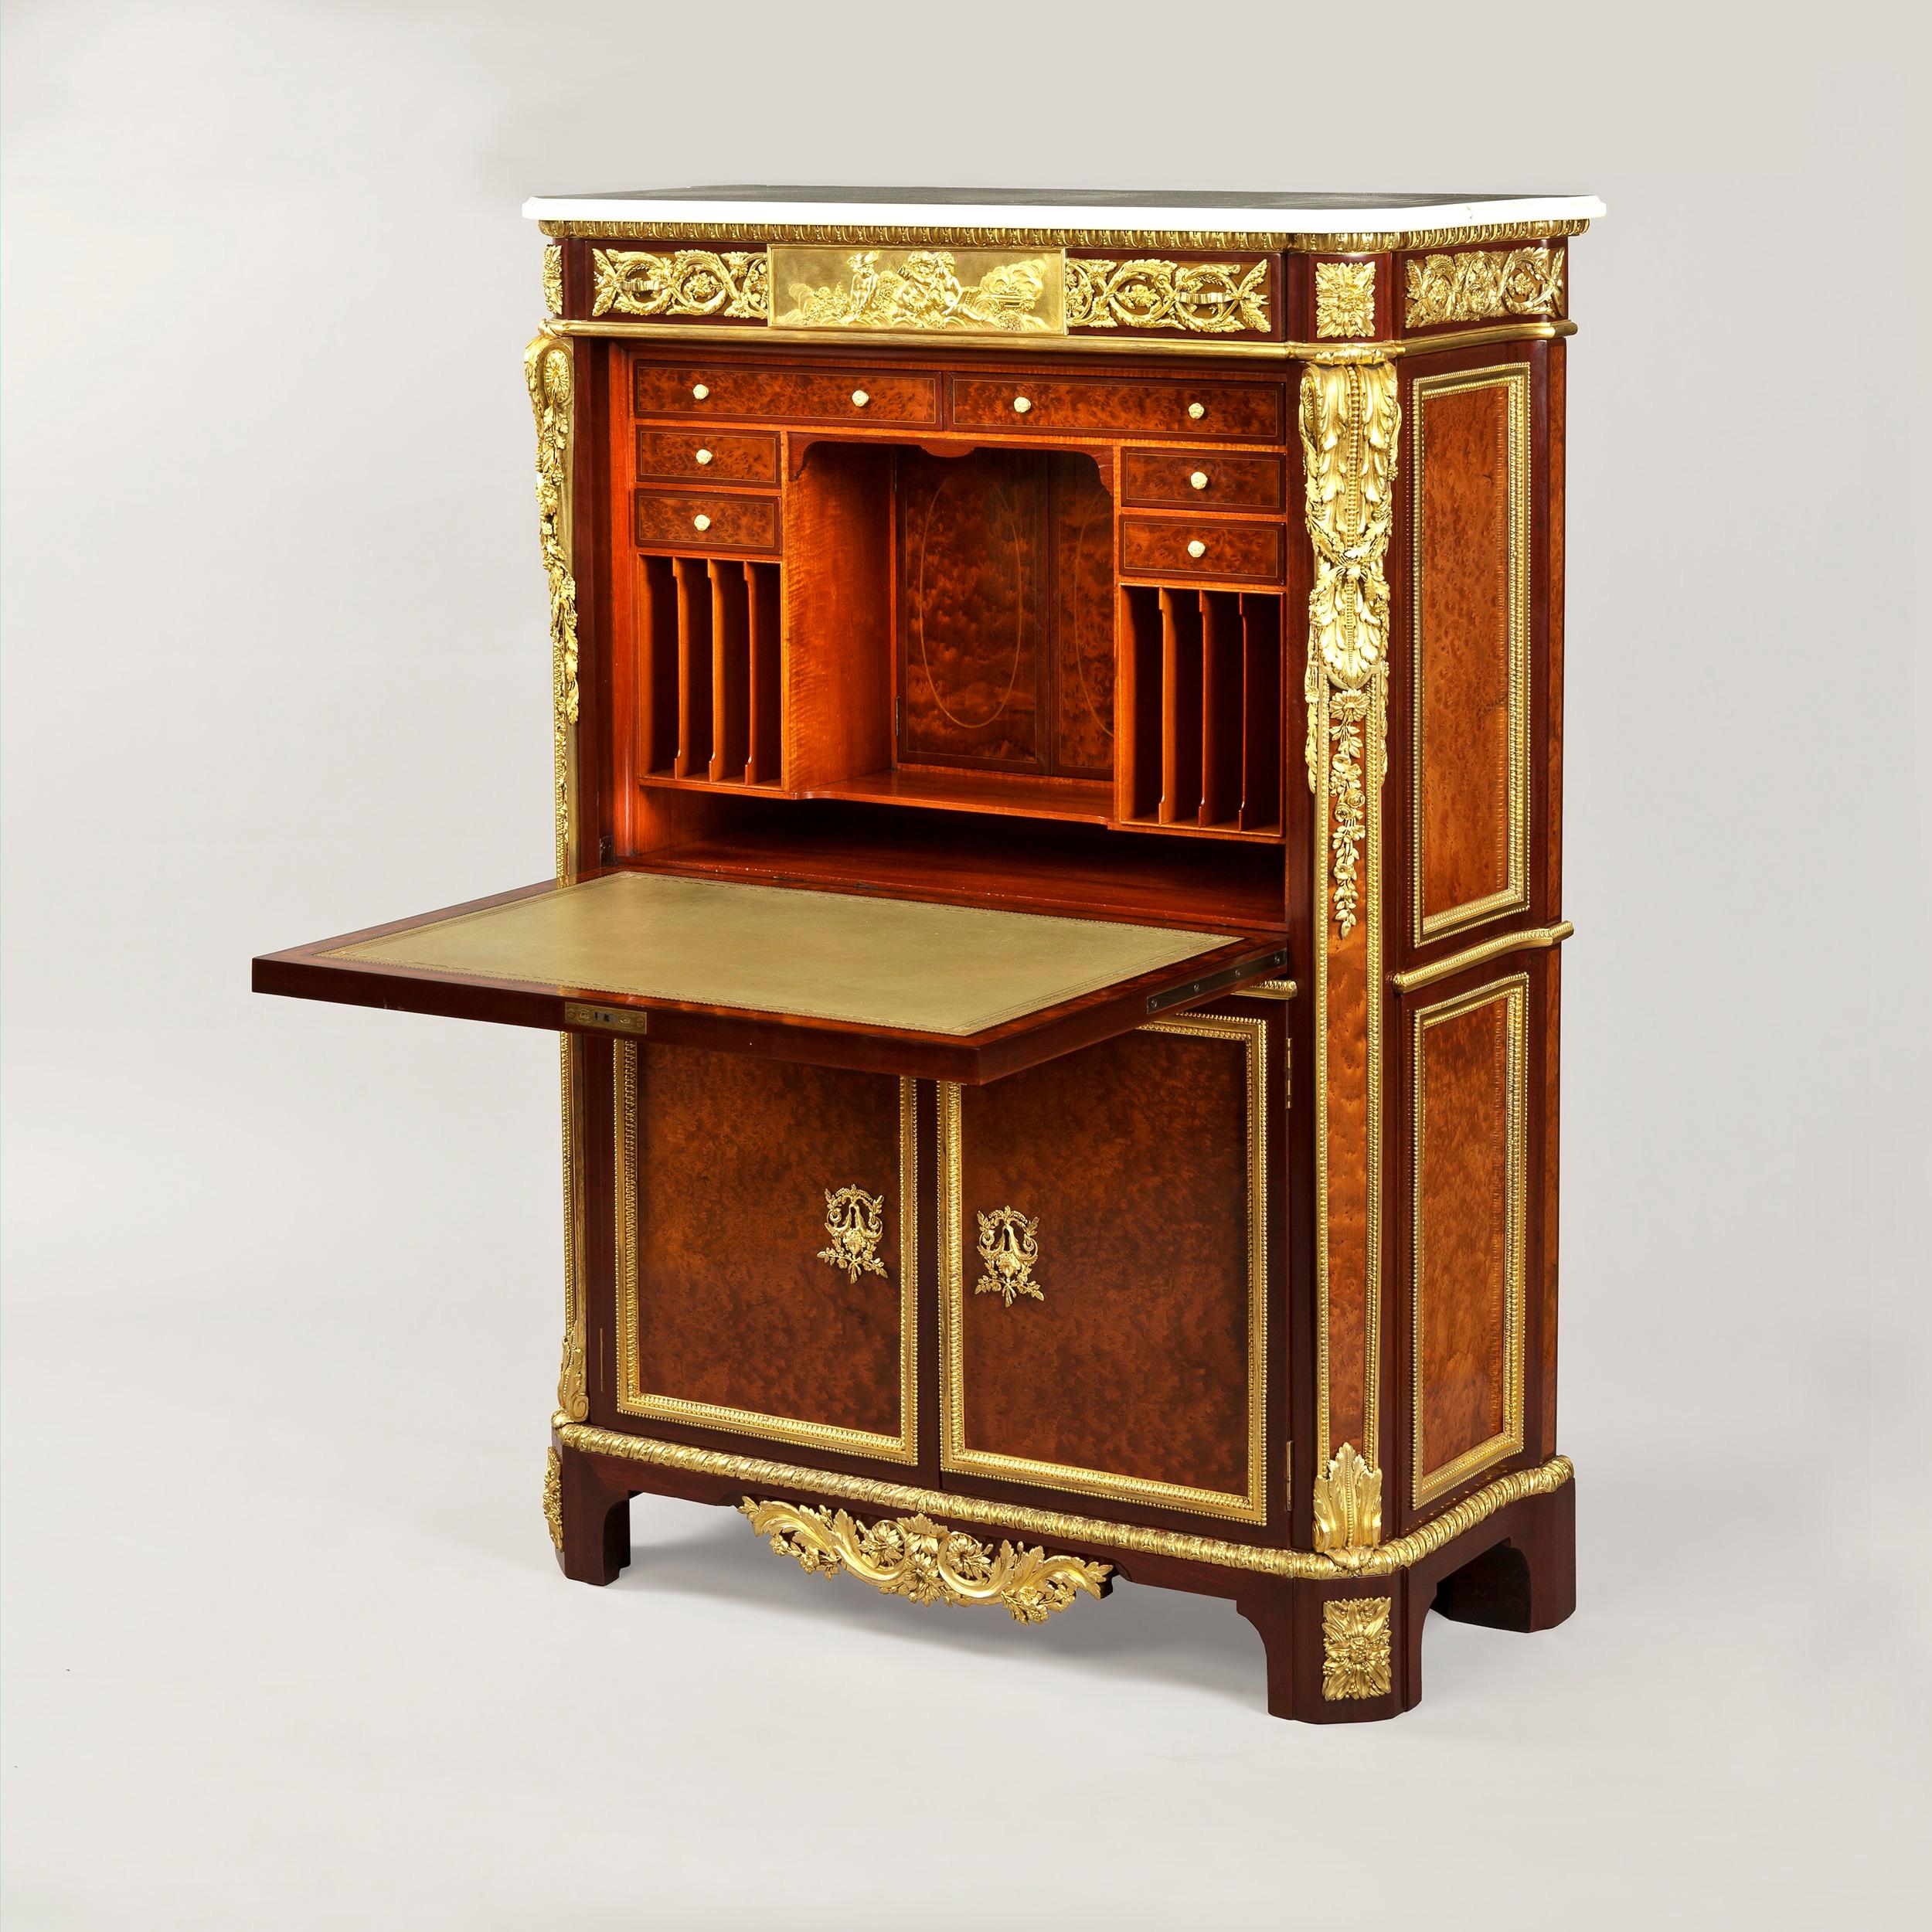 An Exceptionally Rare Secrétaire, 
After the J.H. Riesener example in The Wallace Collection

Of upright rectangular form with canted corners; veneered in thuya-wood, and banded in purple-wood, exuberantly dressed with gilt bronze mounts of the